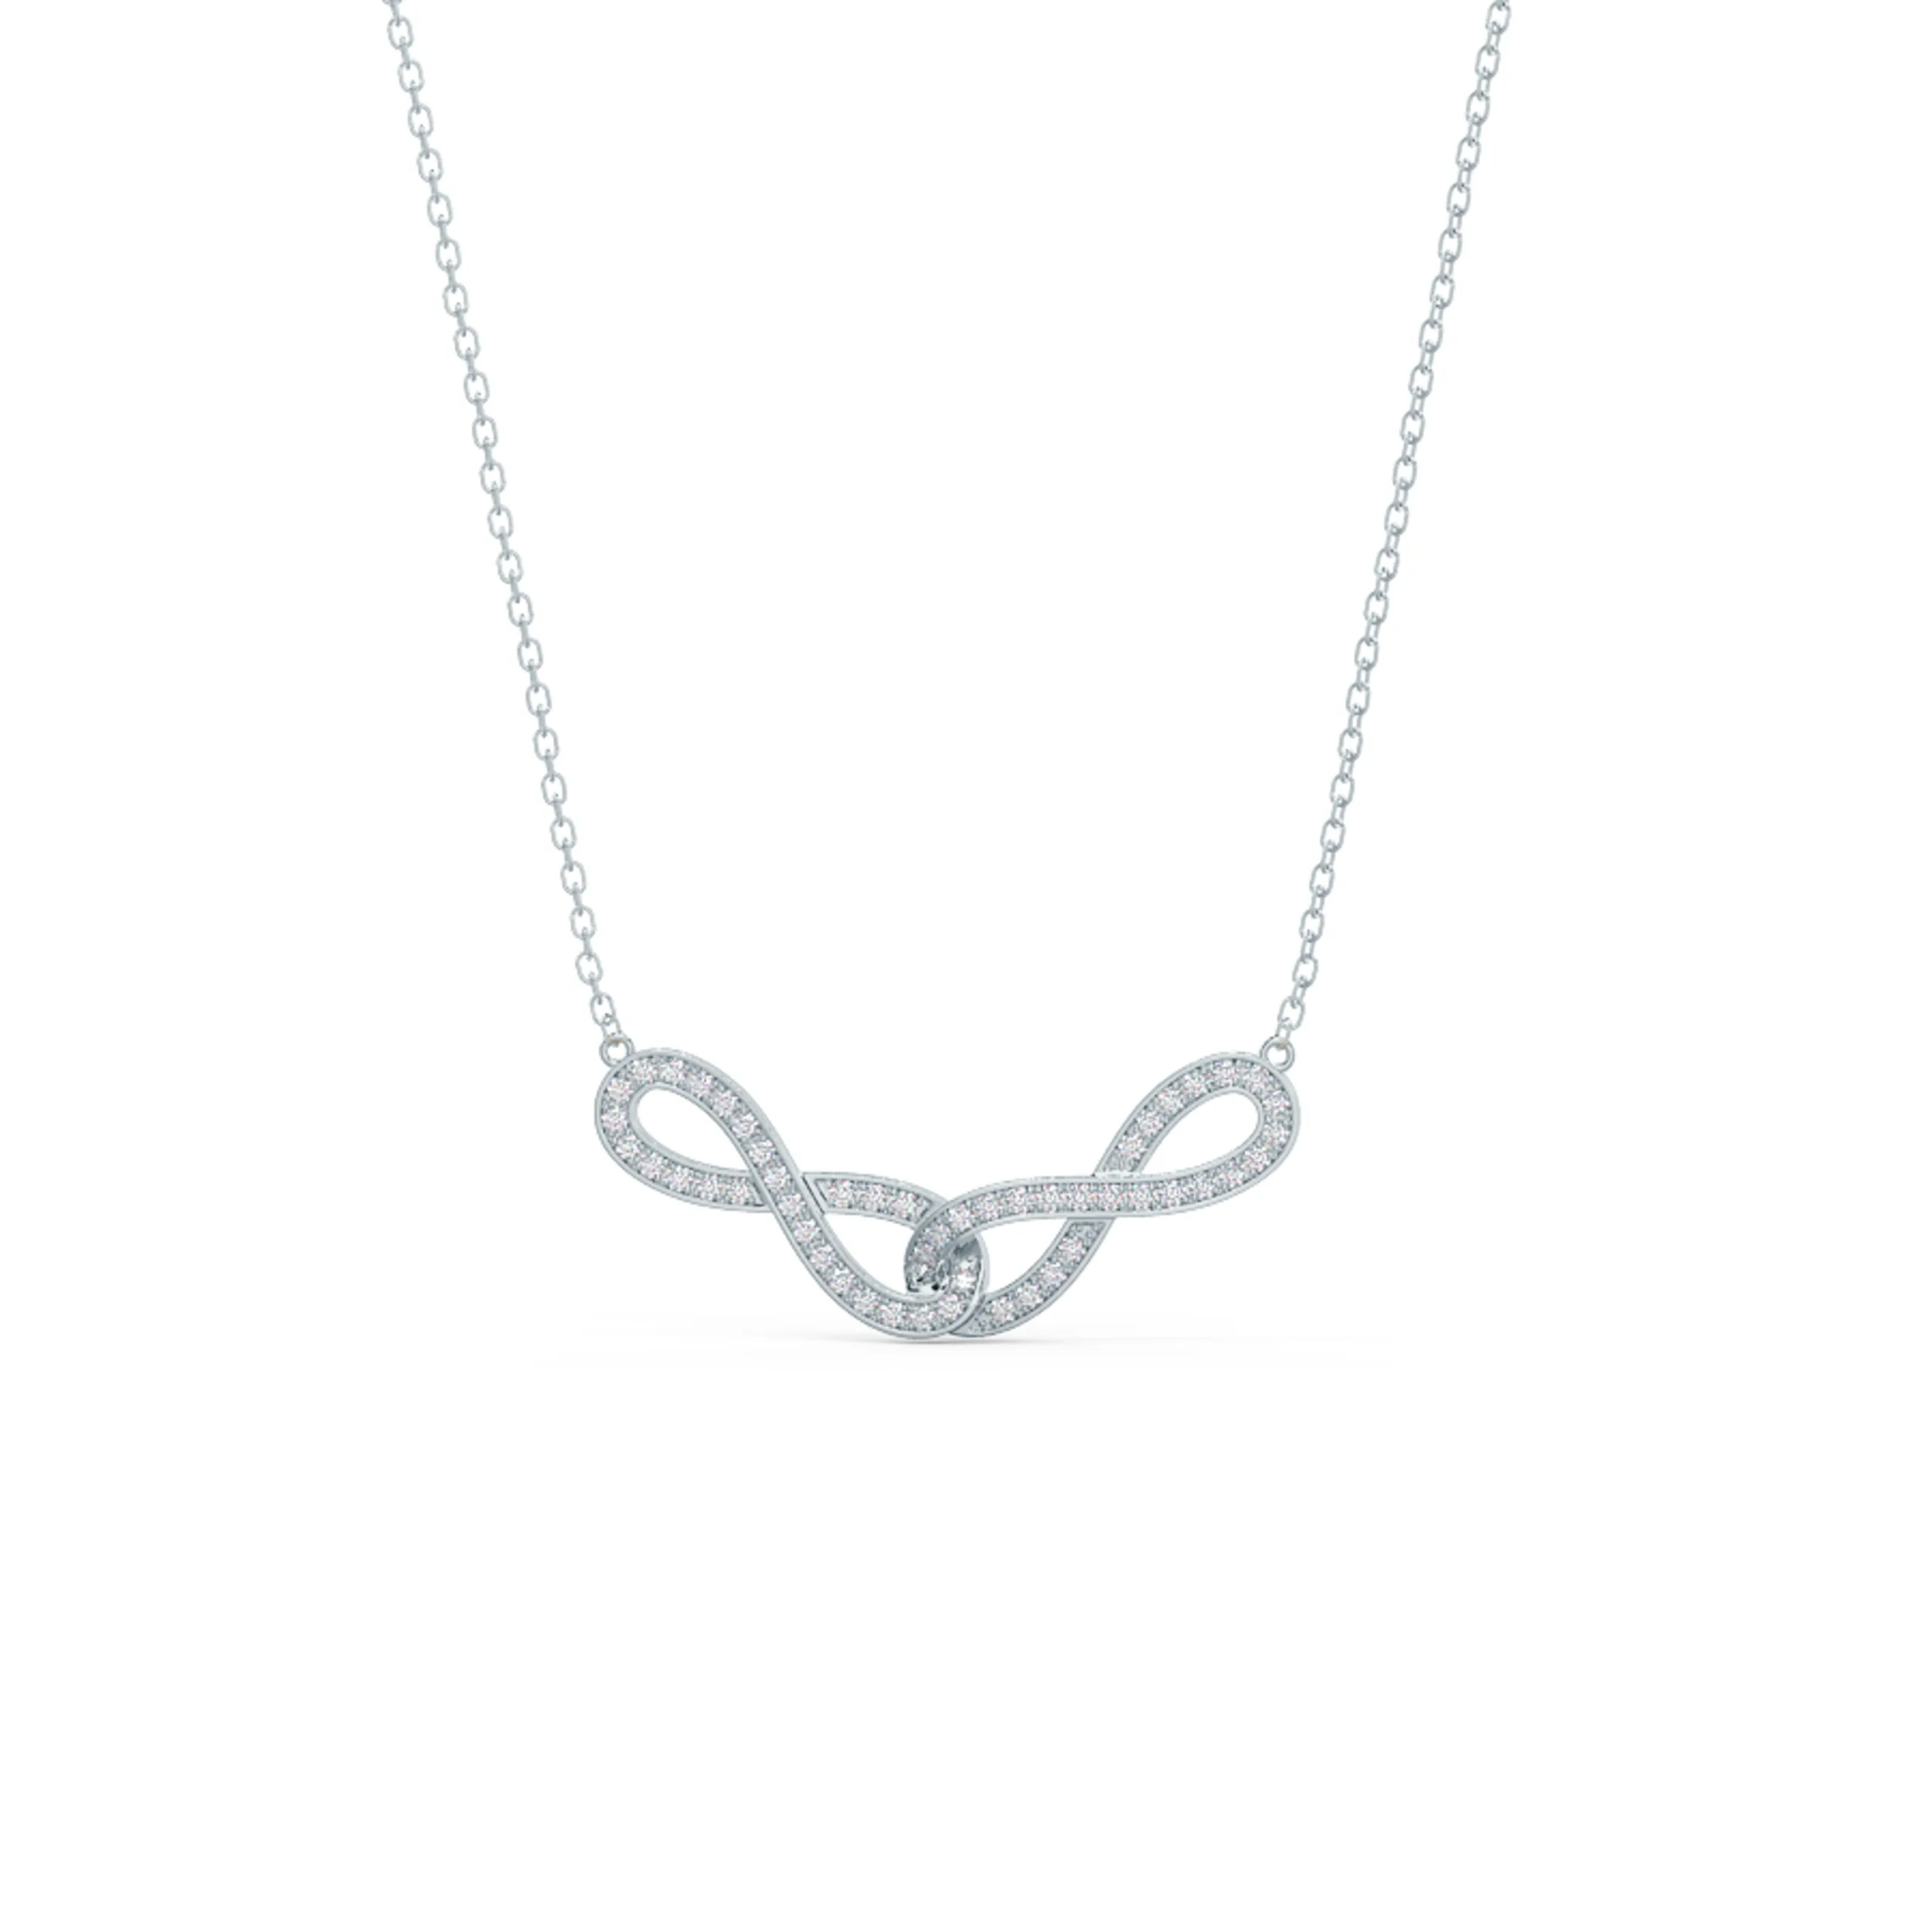 double-infinity-necklace-lab-diamonds-white-gold_1574711972579-H2HF6WWYURB3NW5FH48V